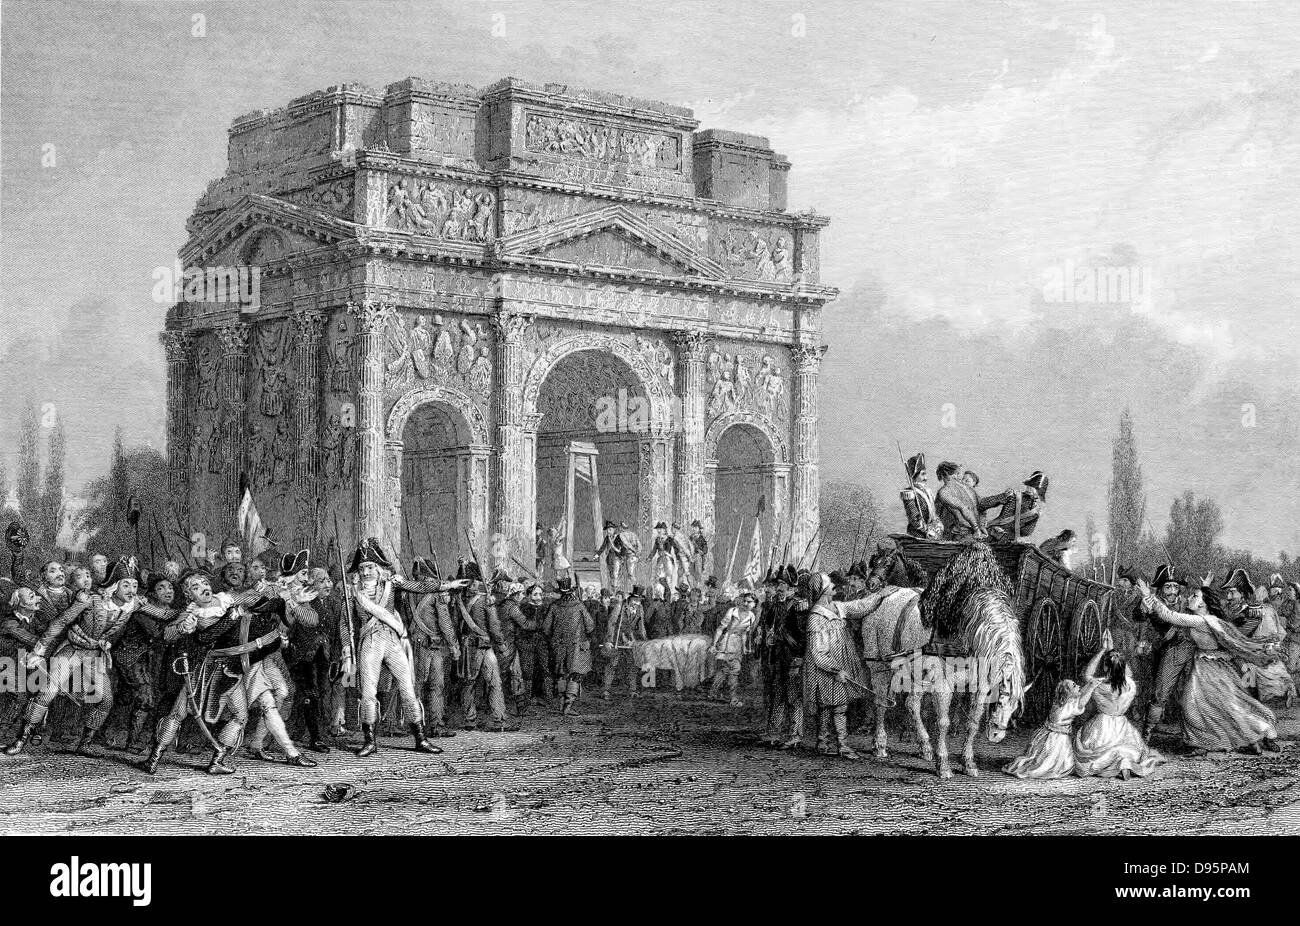 French Revolution. Guillotine set up under the Arch of Marius at Orange, on the Rhone, during the Reign of Terror. Engraving. Stock Photo